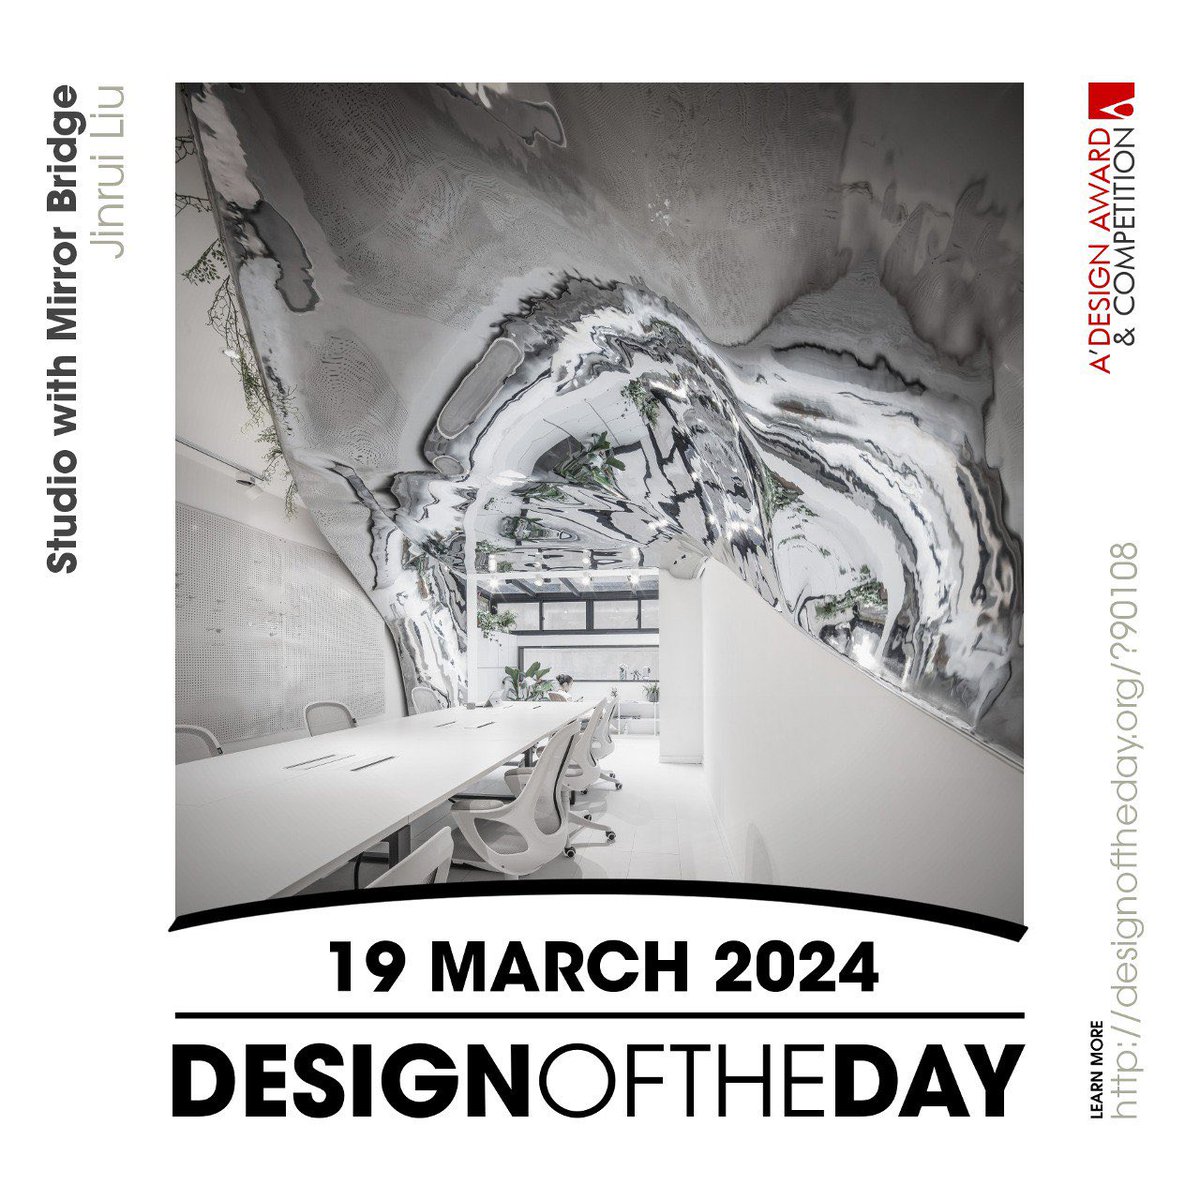 Congrats to Jinrui Liu, the creator behind the Design of the Day of 19 March 2024 - Studio with Mirror Bridge. Check out this great work now. We are currently featuring it at designoftheday.org/?90108 #adesignaward #adesigncompetition #interiordesign #mirror